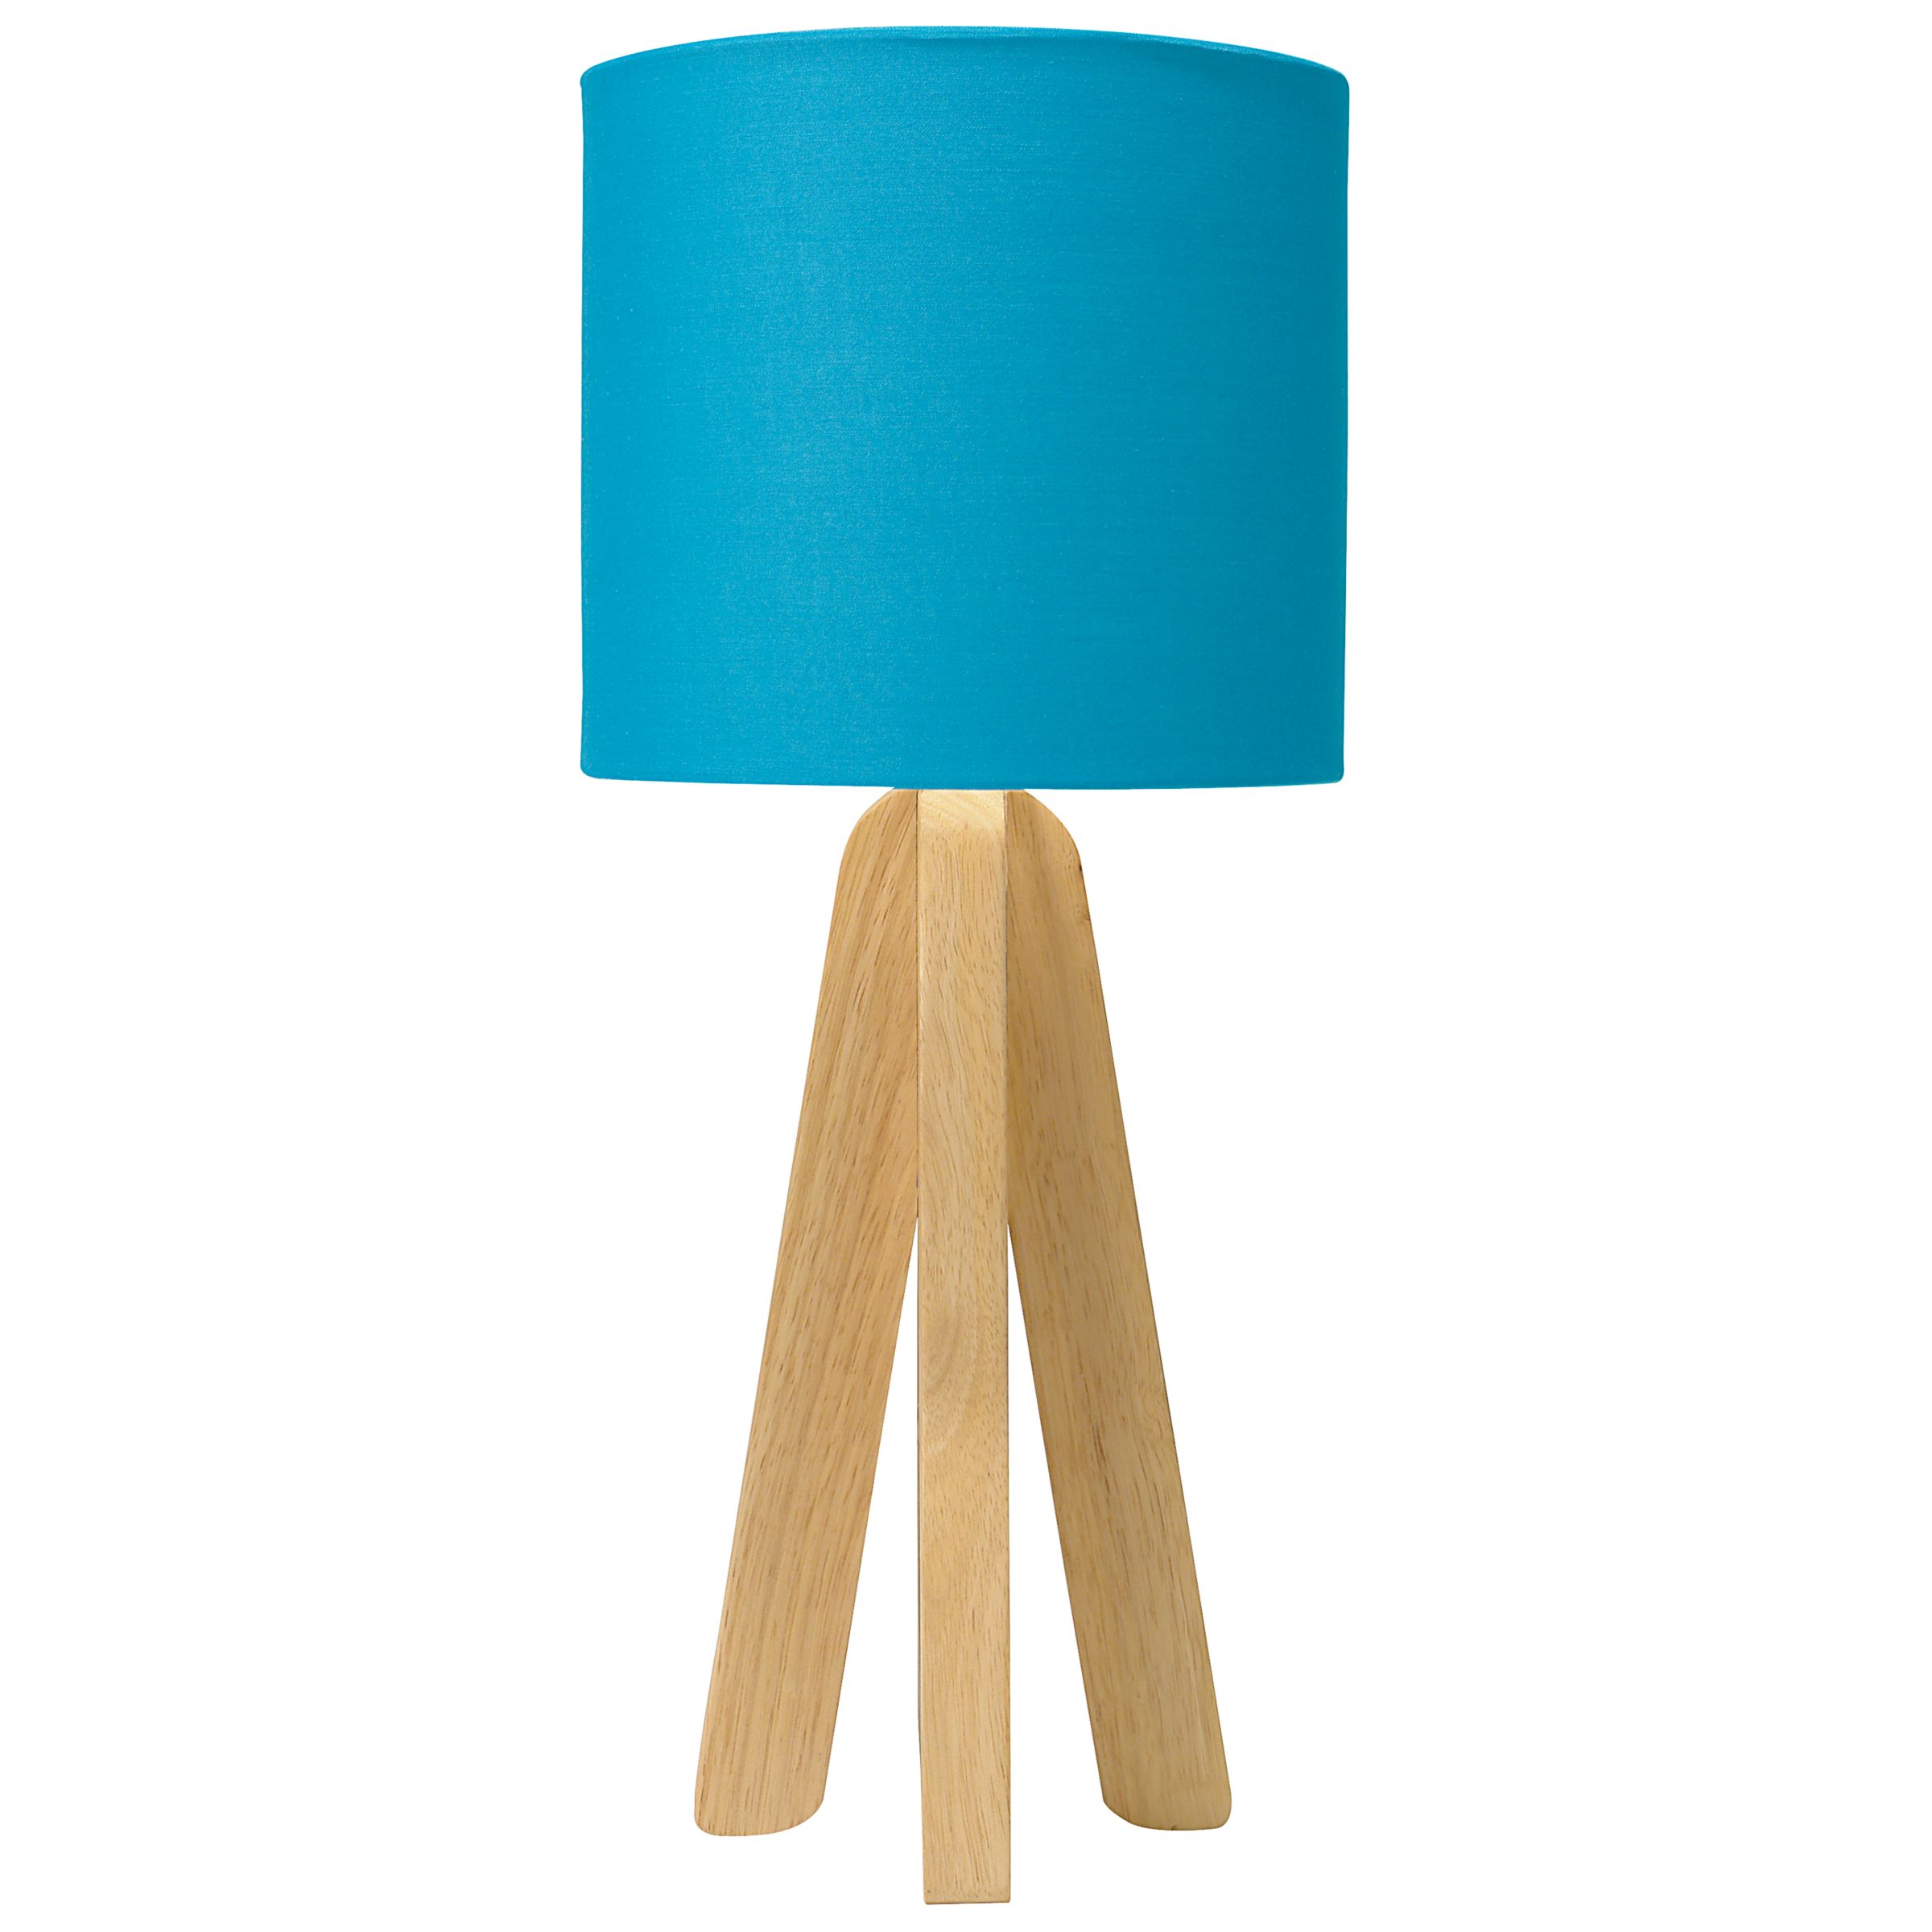 Kylie Table Lamp, Turquoise